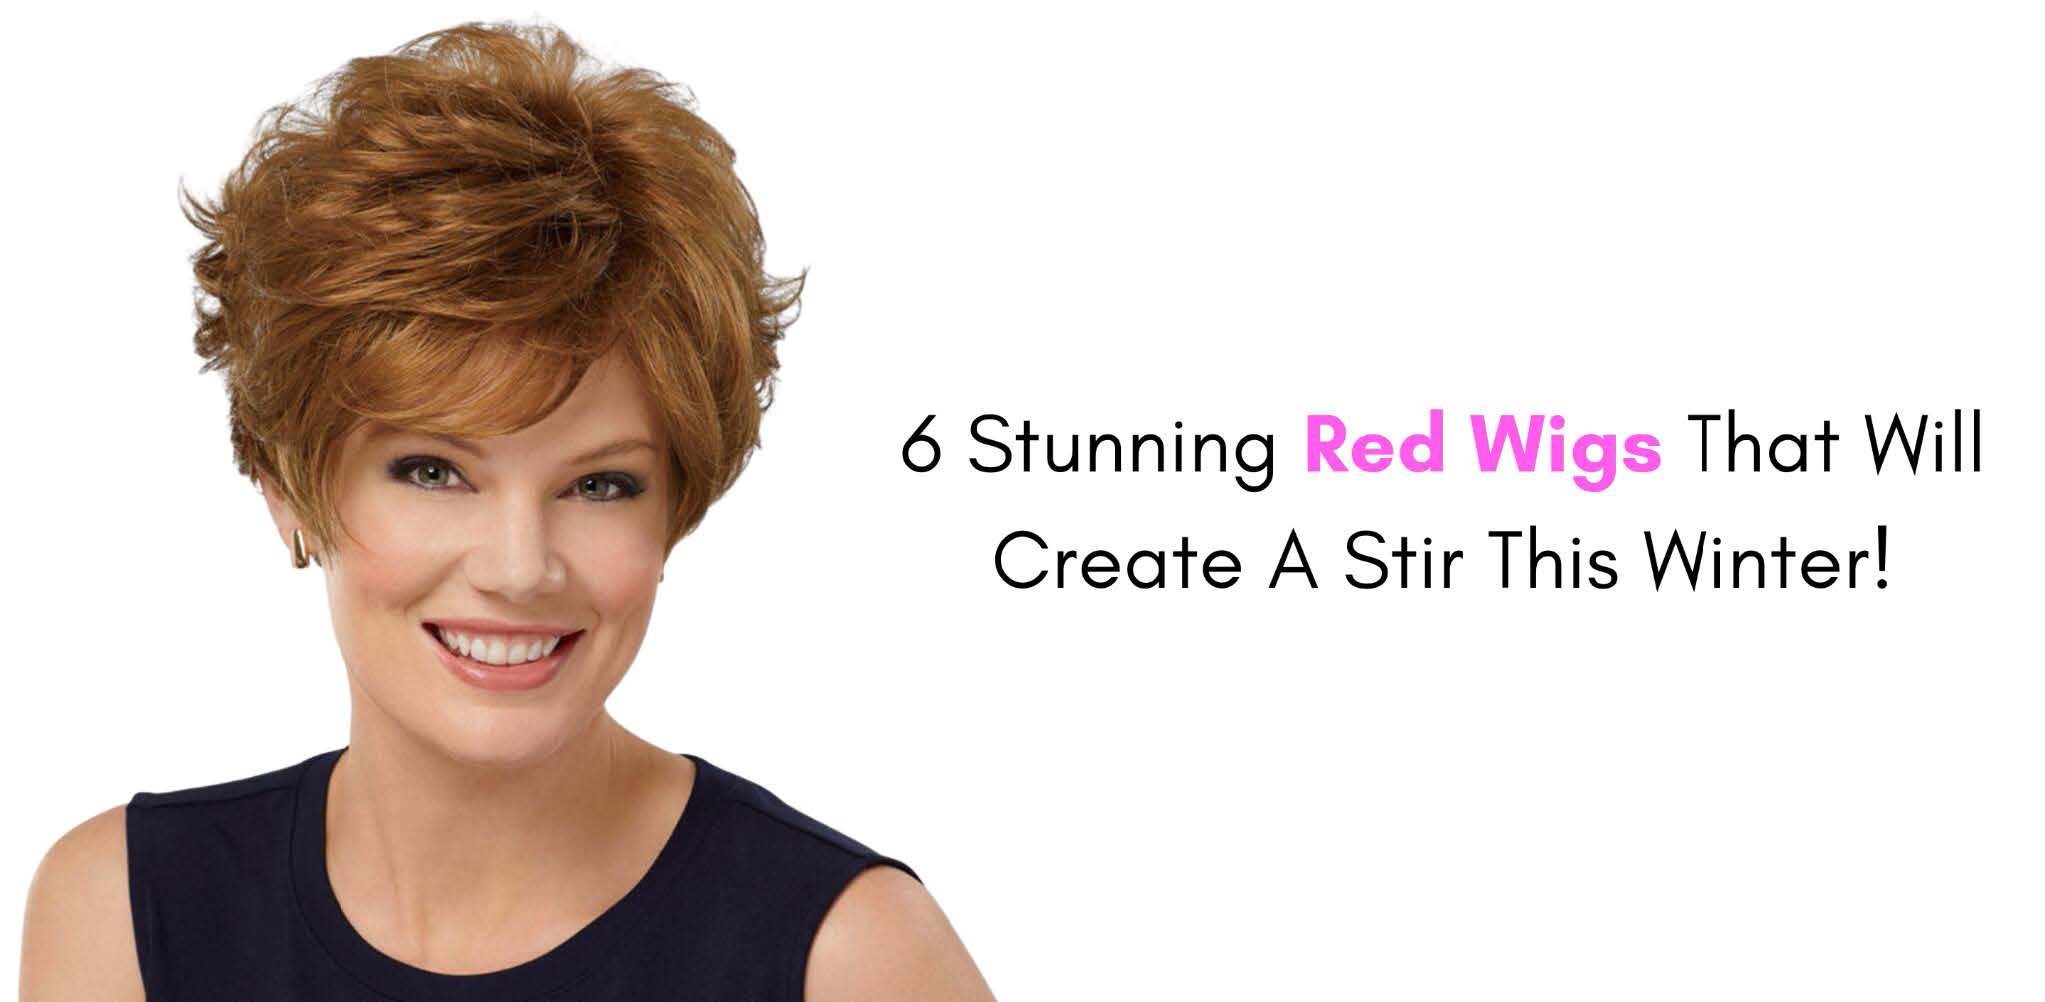 6 stunning red wigs that will create a stir this winter